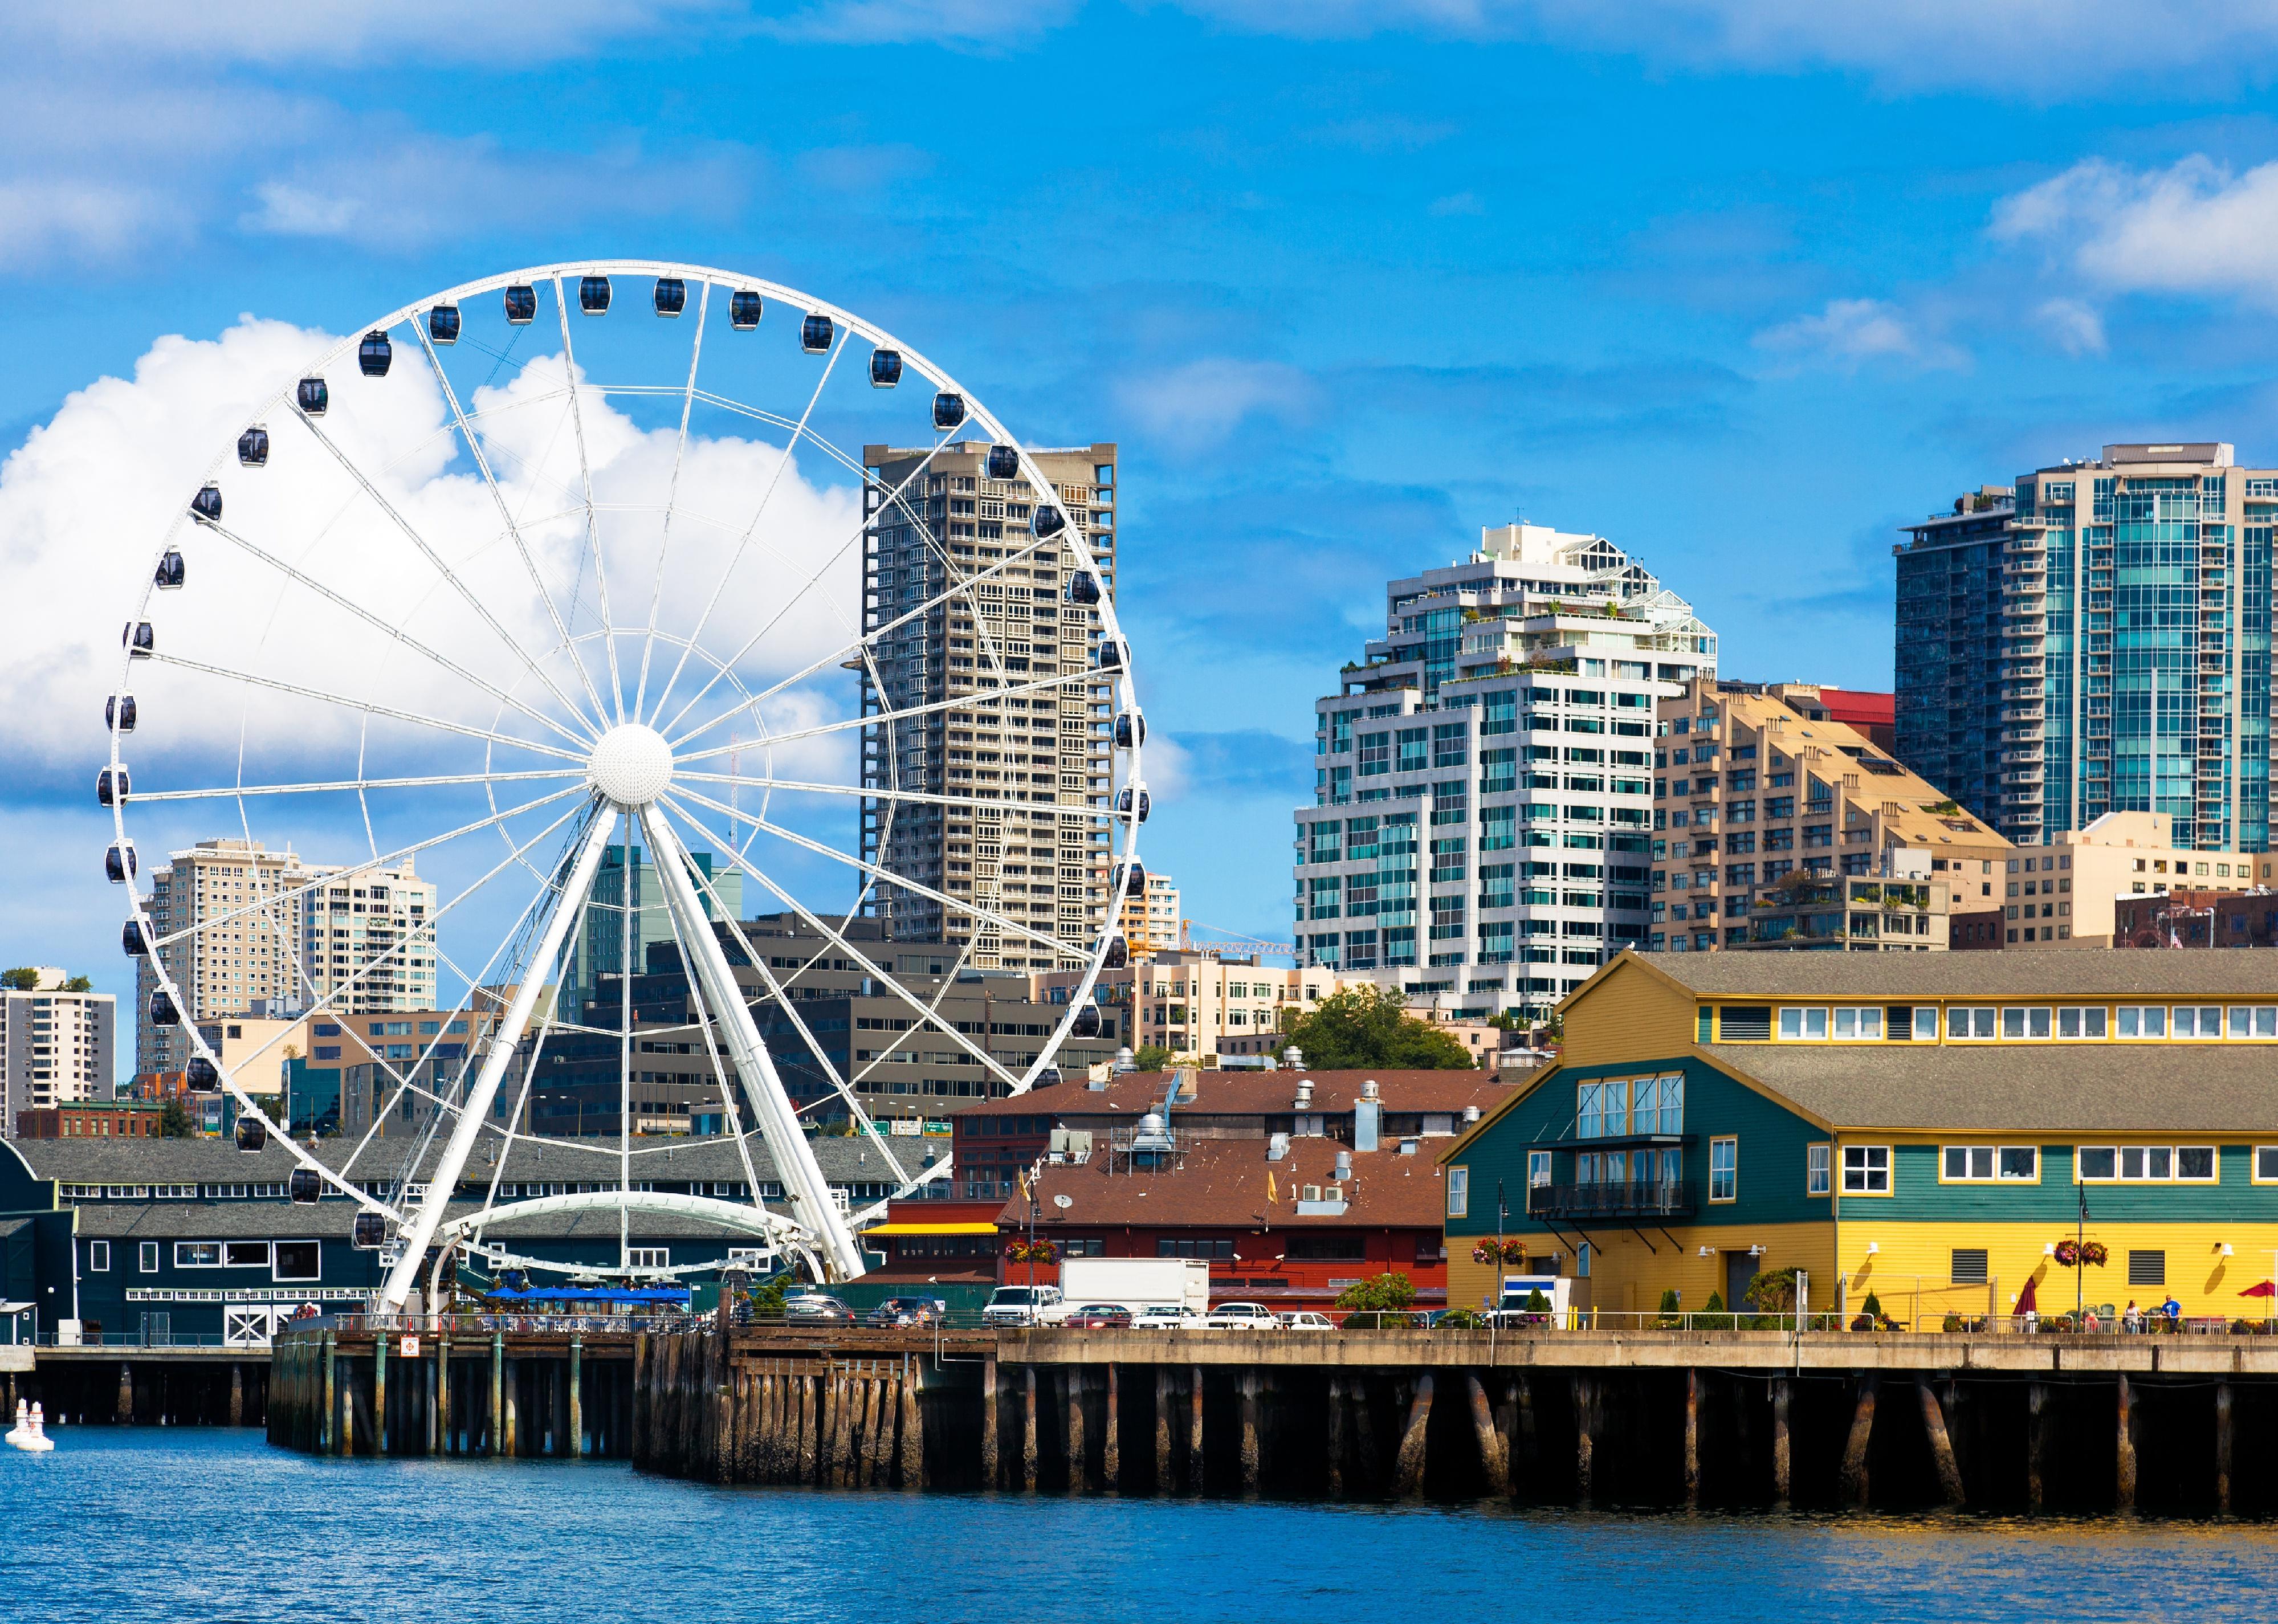 A view of the Great Wheel on Seattle's waterfront.